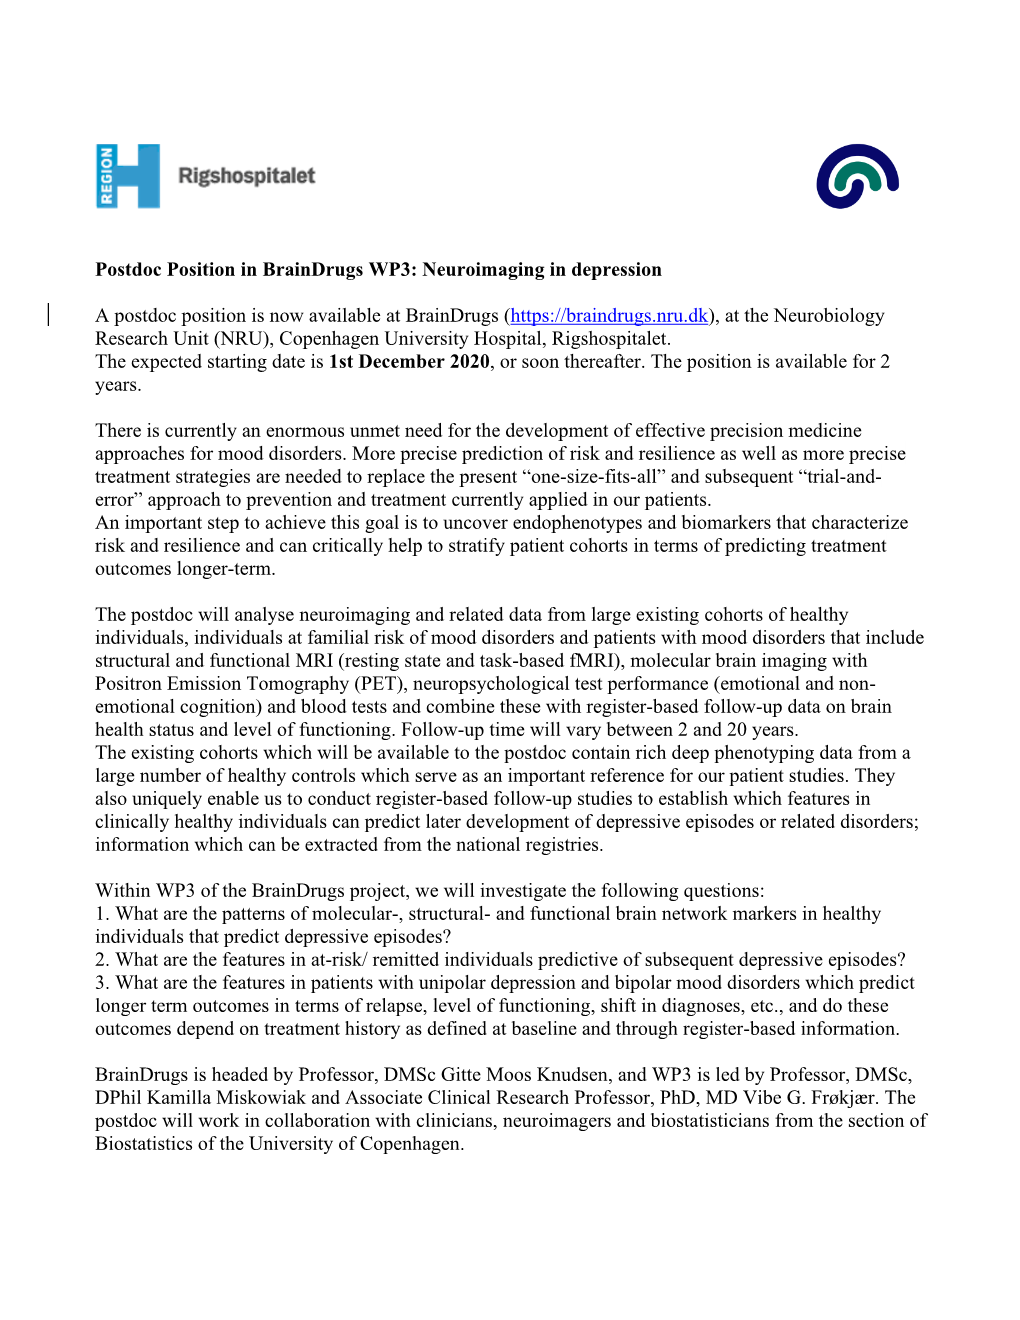 Postdoc Position in Braindrugs WP3: Neuroimaging in Depression A